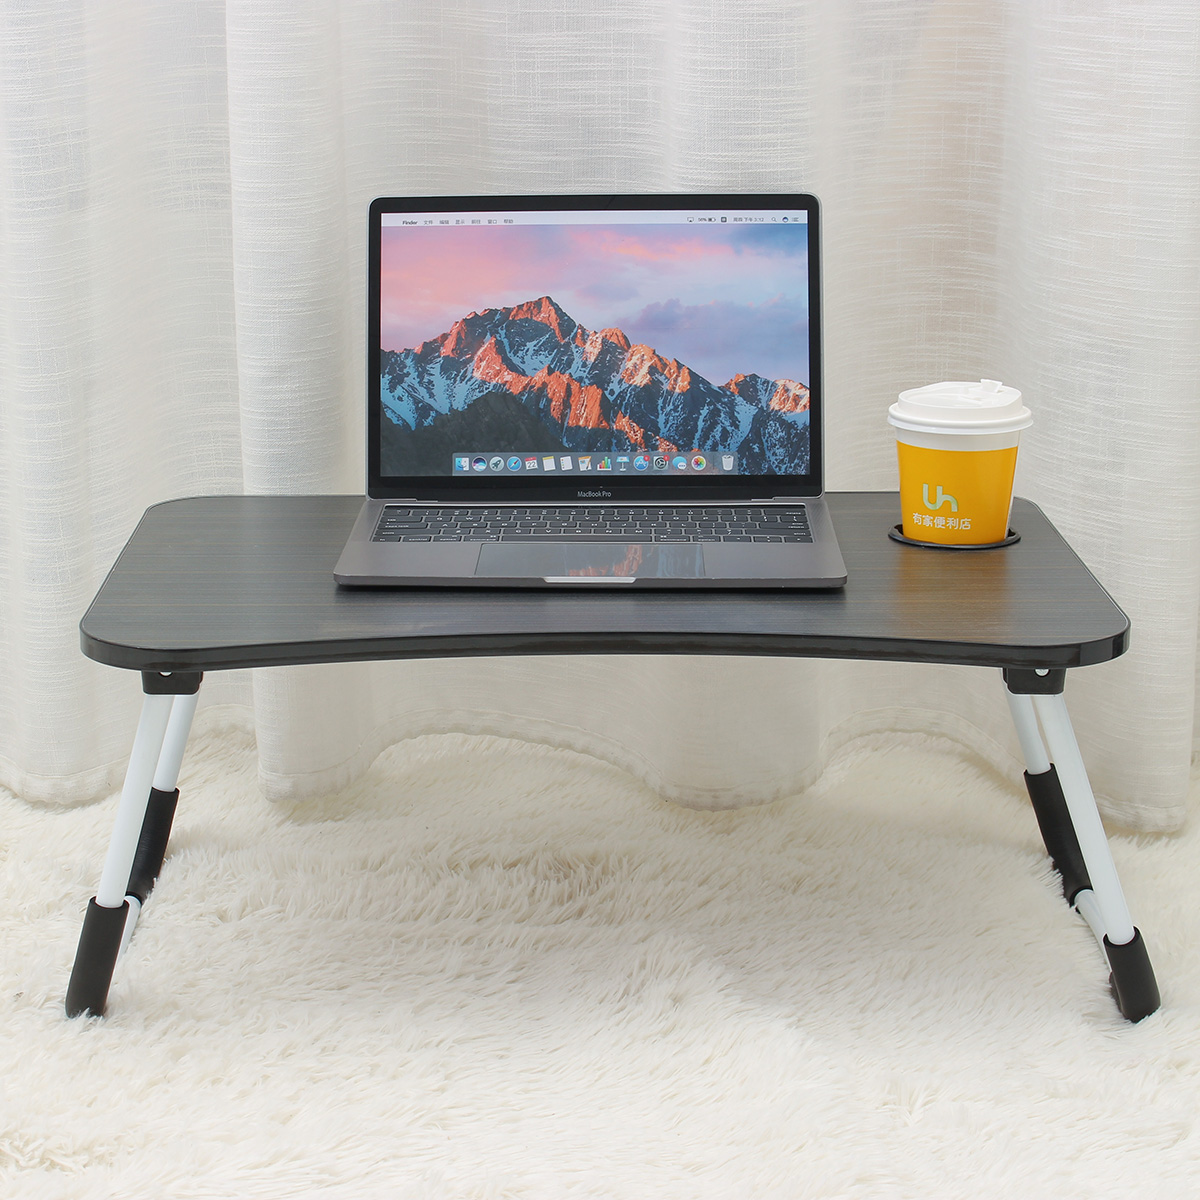 Home Folding Laptop Desk Bed Sofa Laptop Tray Table Desk Portable Lap Small Desk for Study and Reading